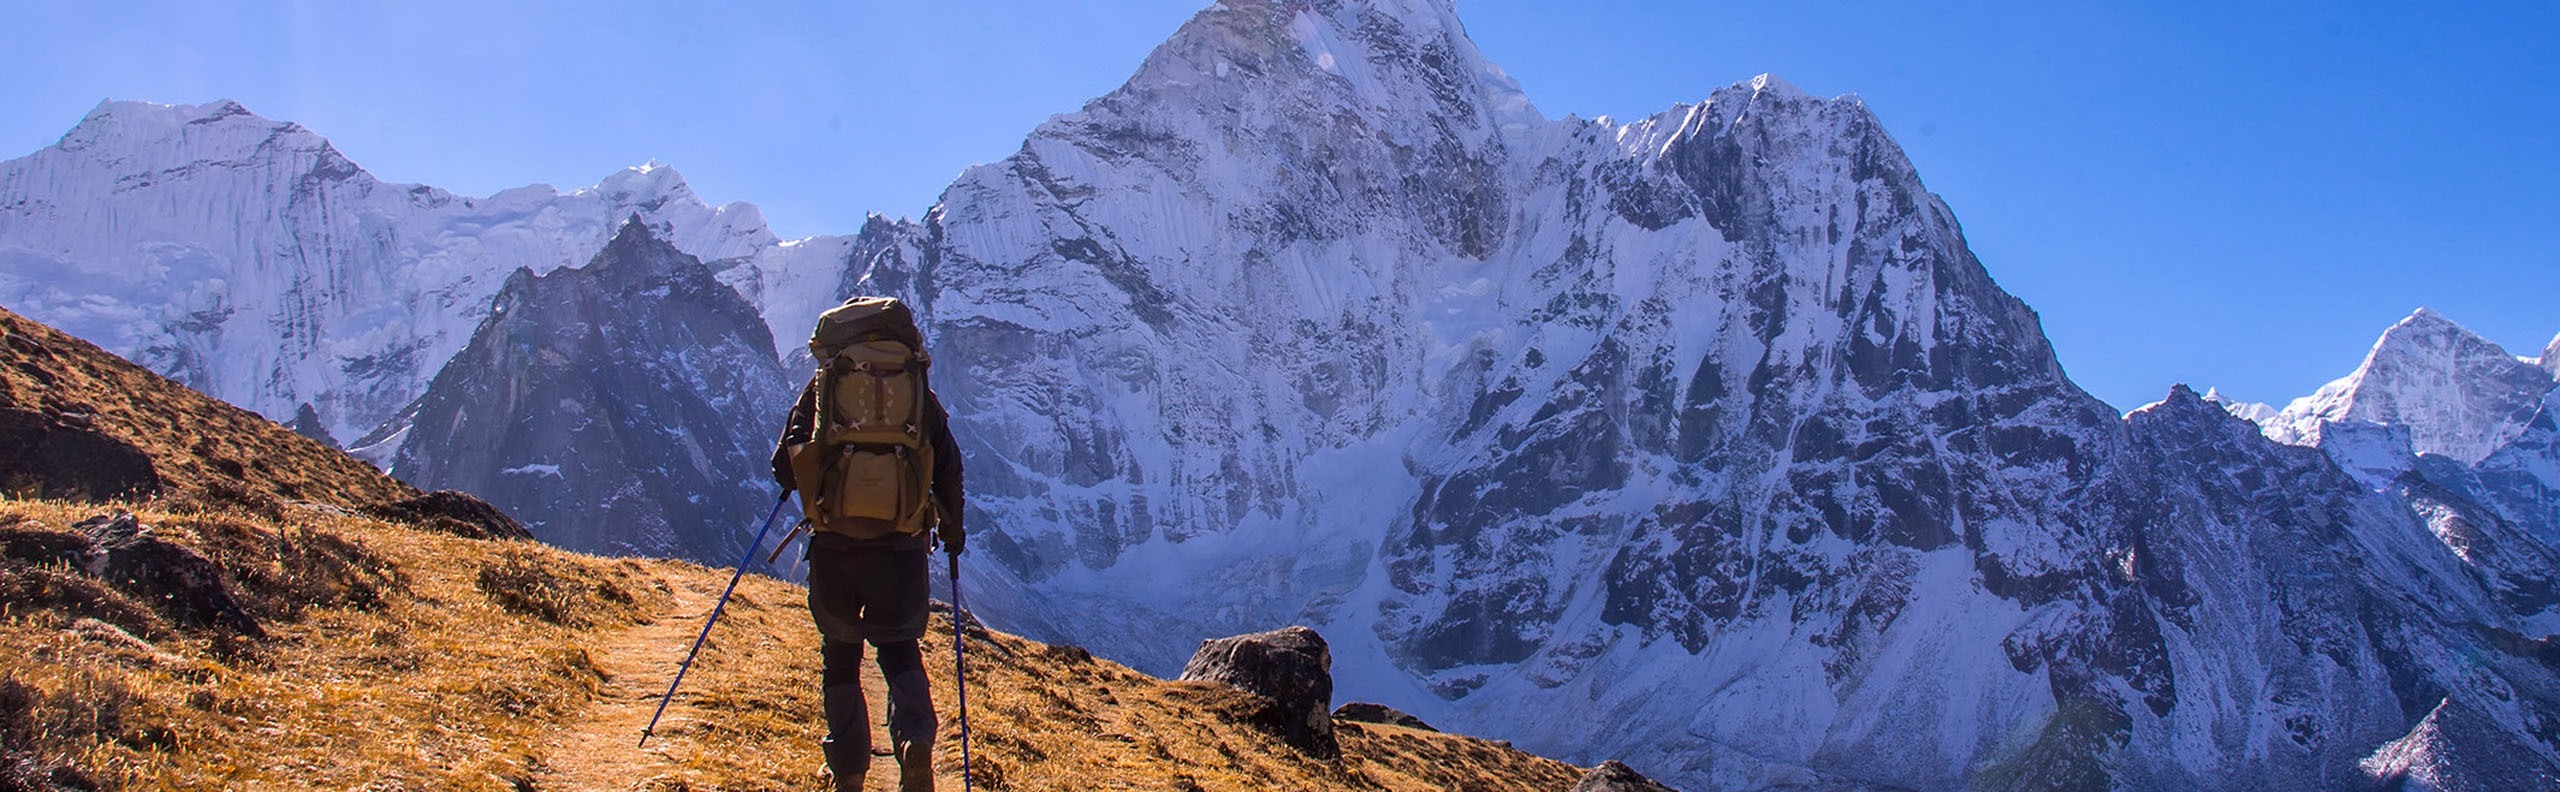 Nepal Trekking Guide — Find the Right Trek for You